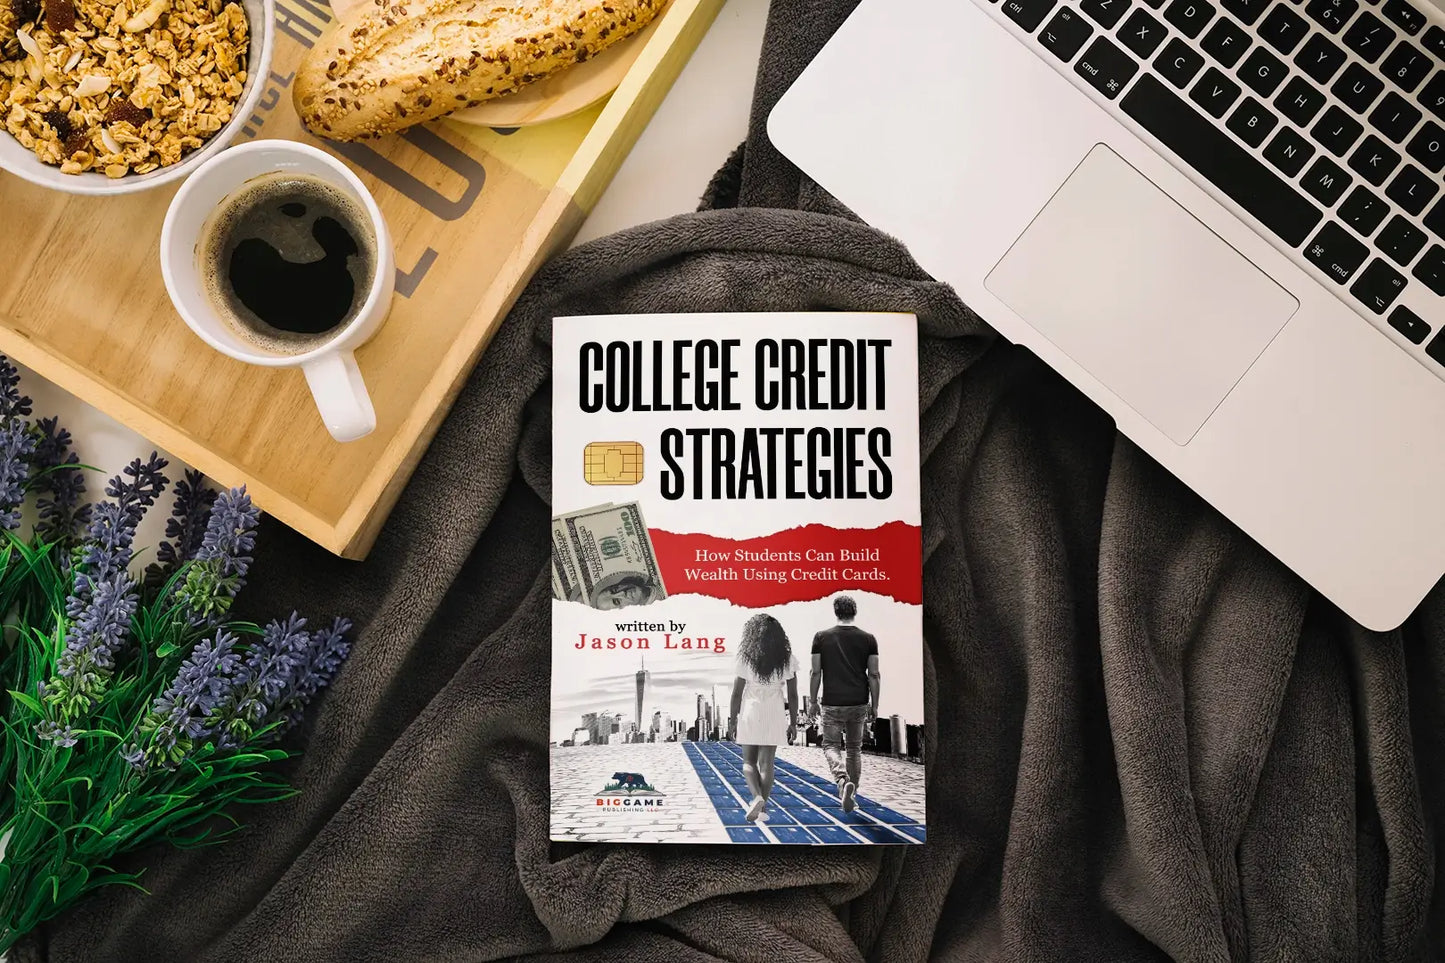 College Credit Strategies: How Students Can Build Wealth Using Credit Cards